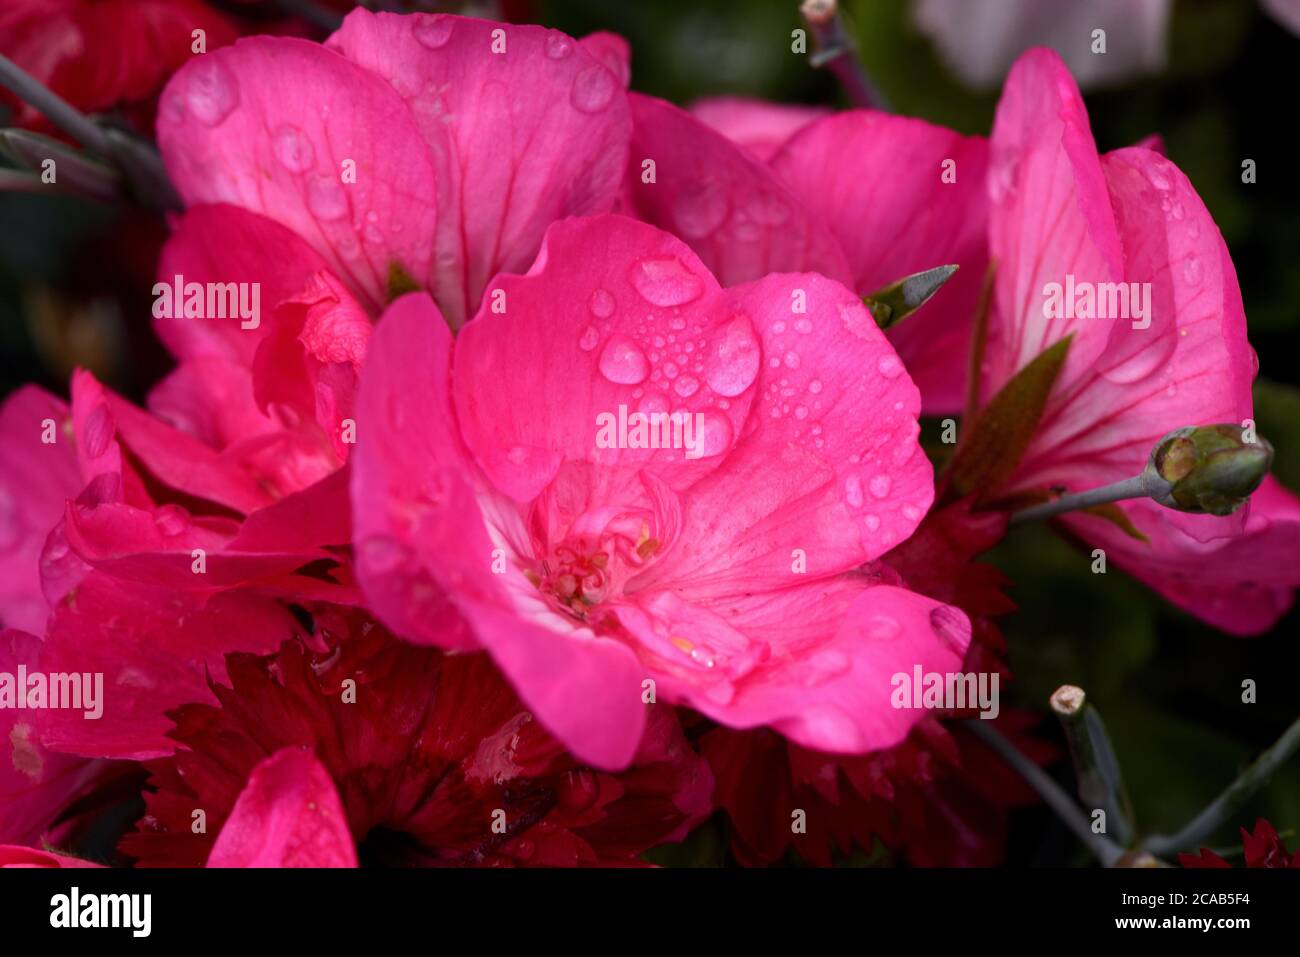 Water drops on the petals of a pink Geranium flower in a garden in Victoria, British Columbia, Canada on Vancouver Island. Stock Photo